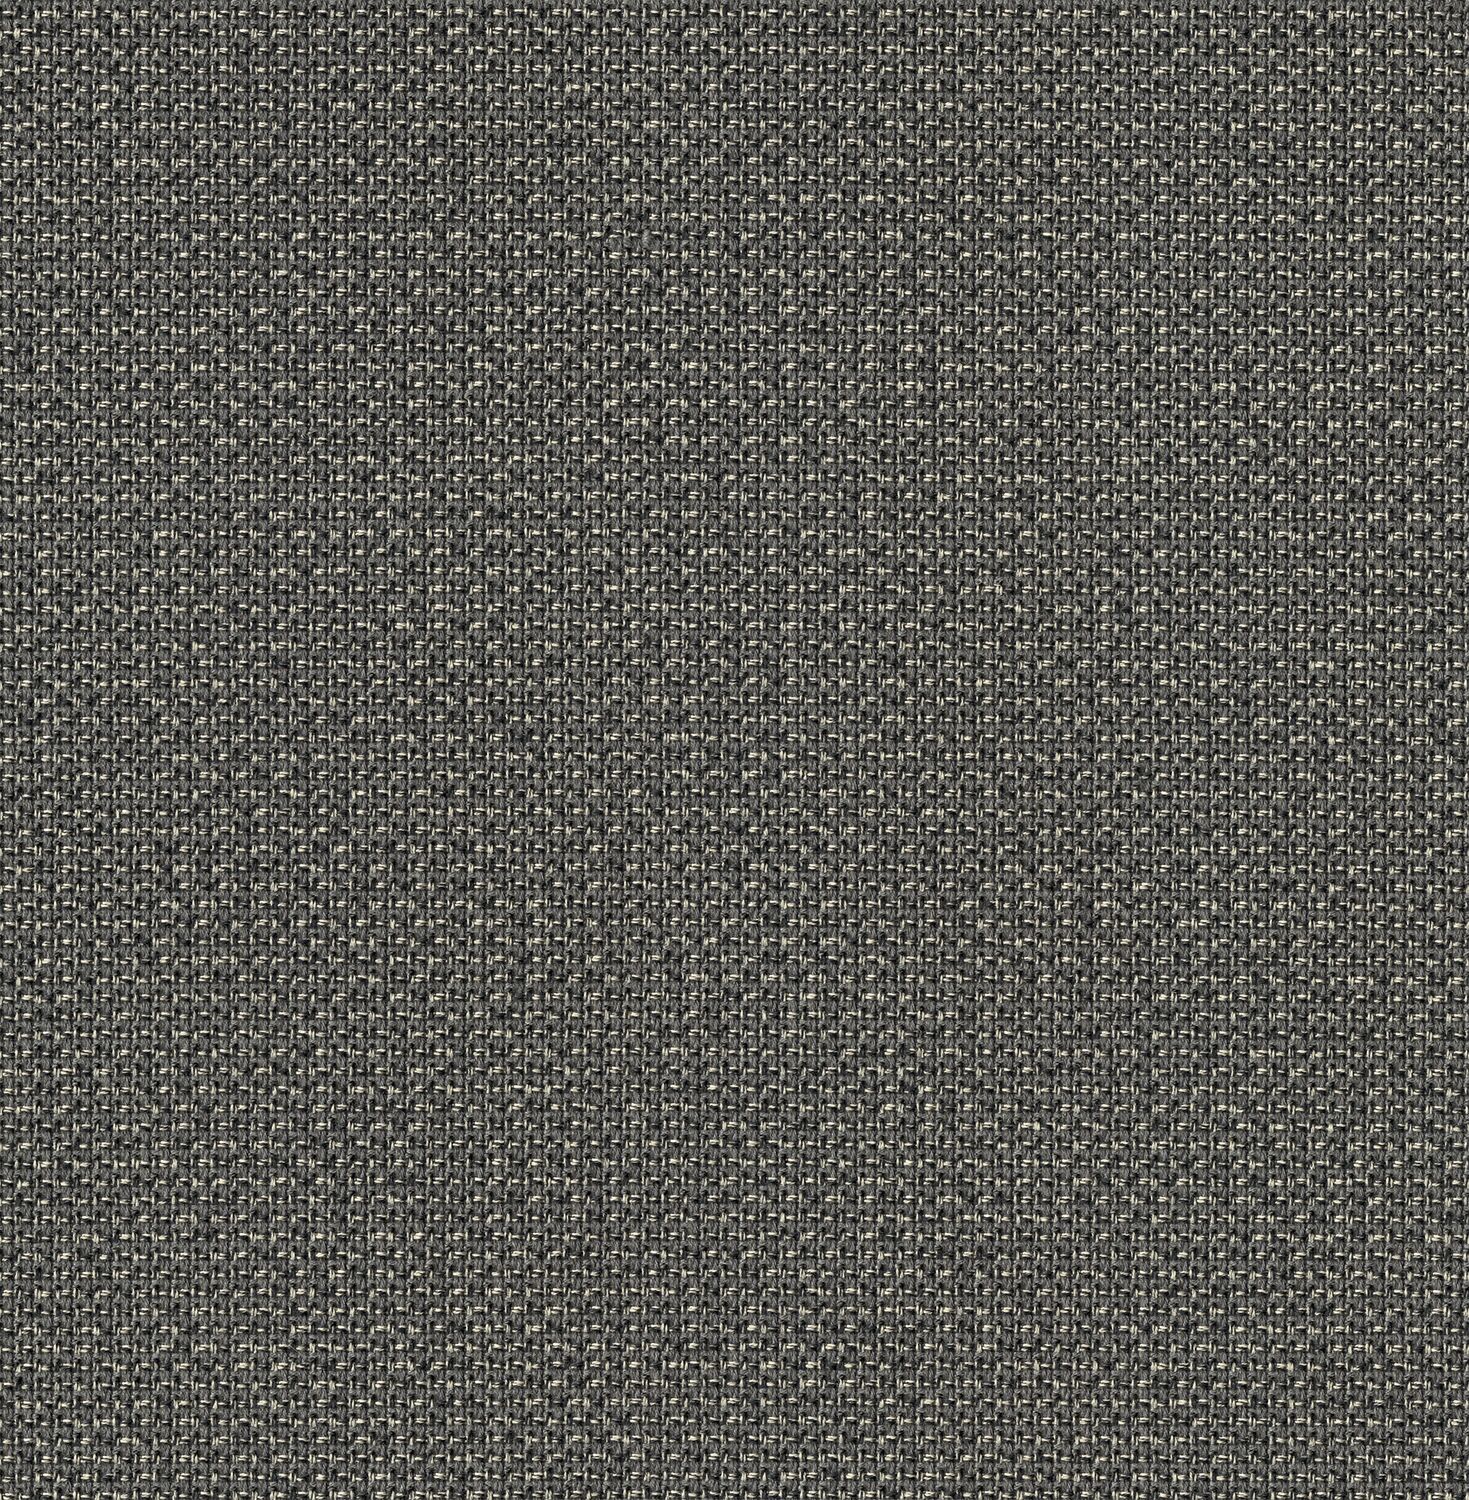 Barberpole Basket - Maelstrom - 4114 - 02 Tileable Swatches